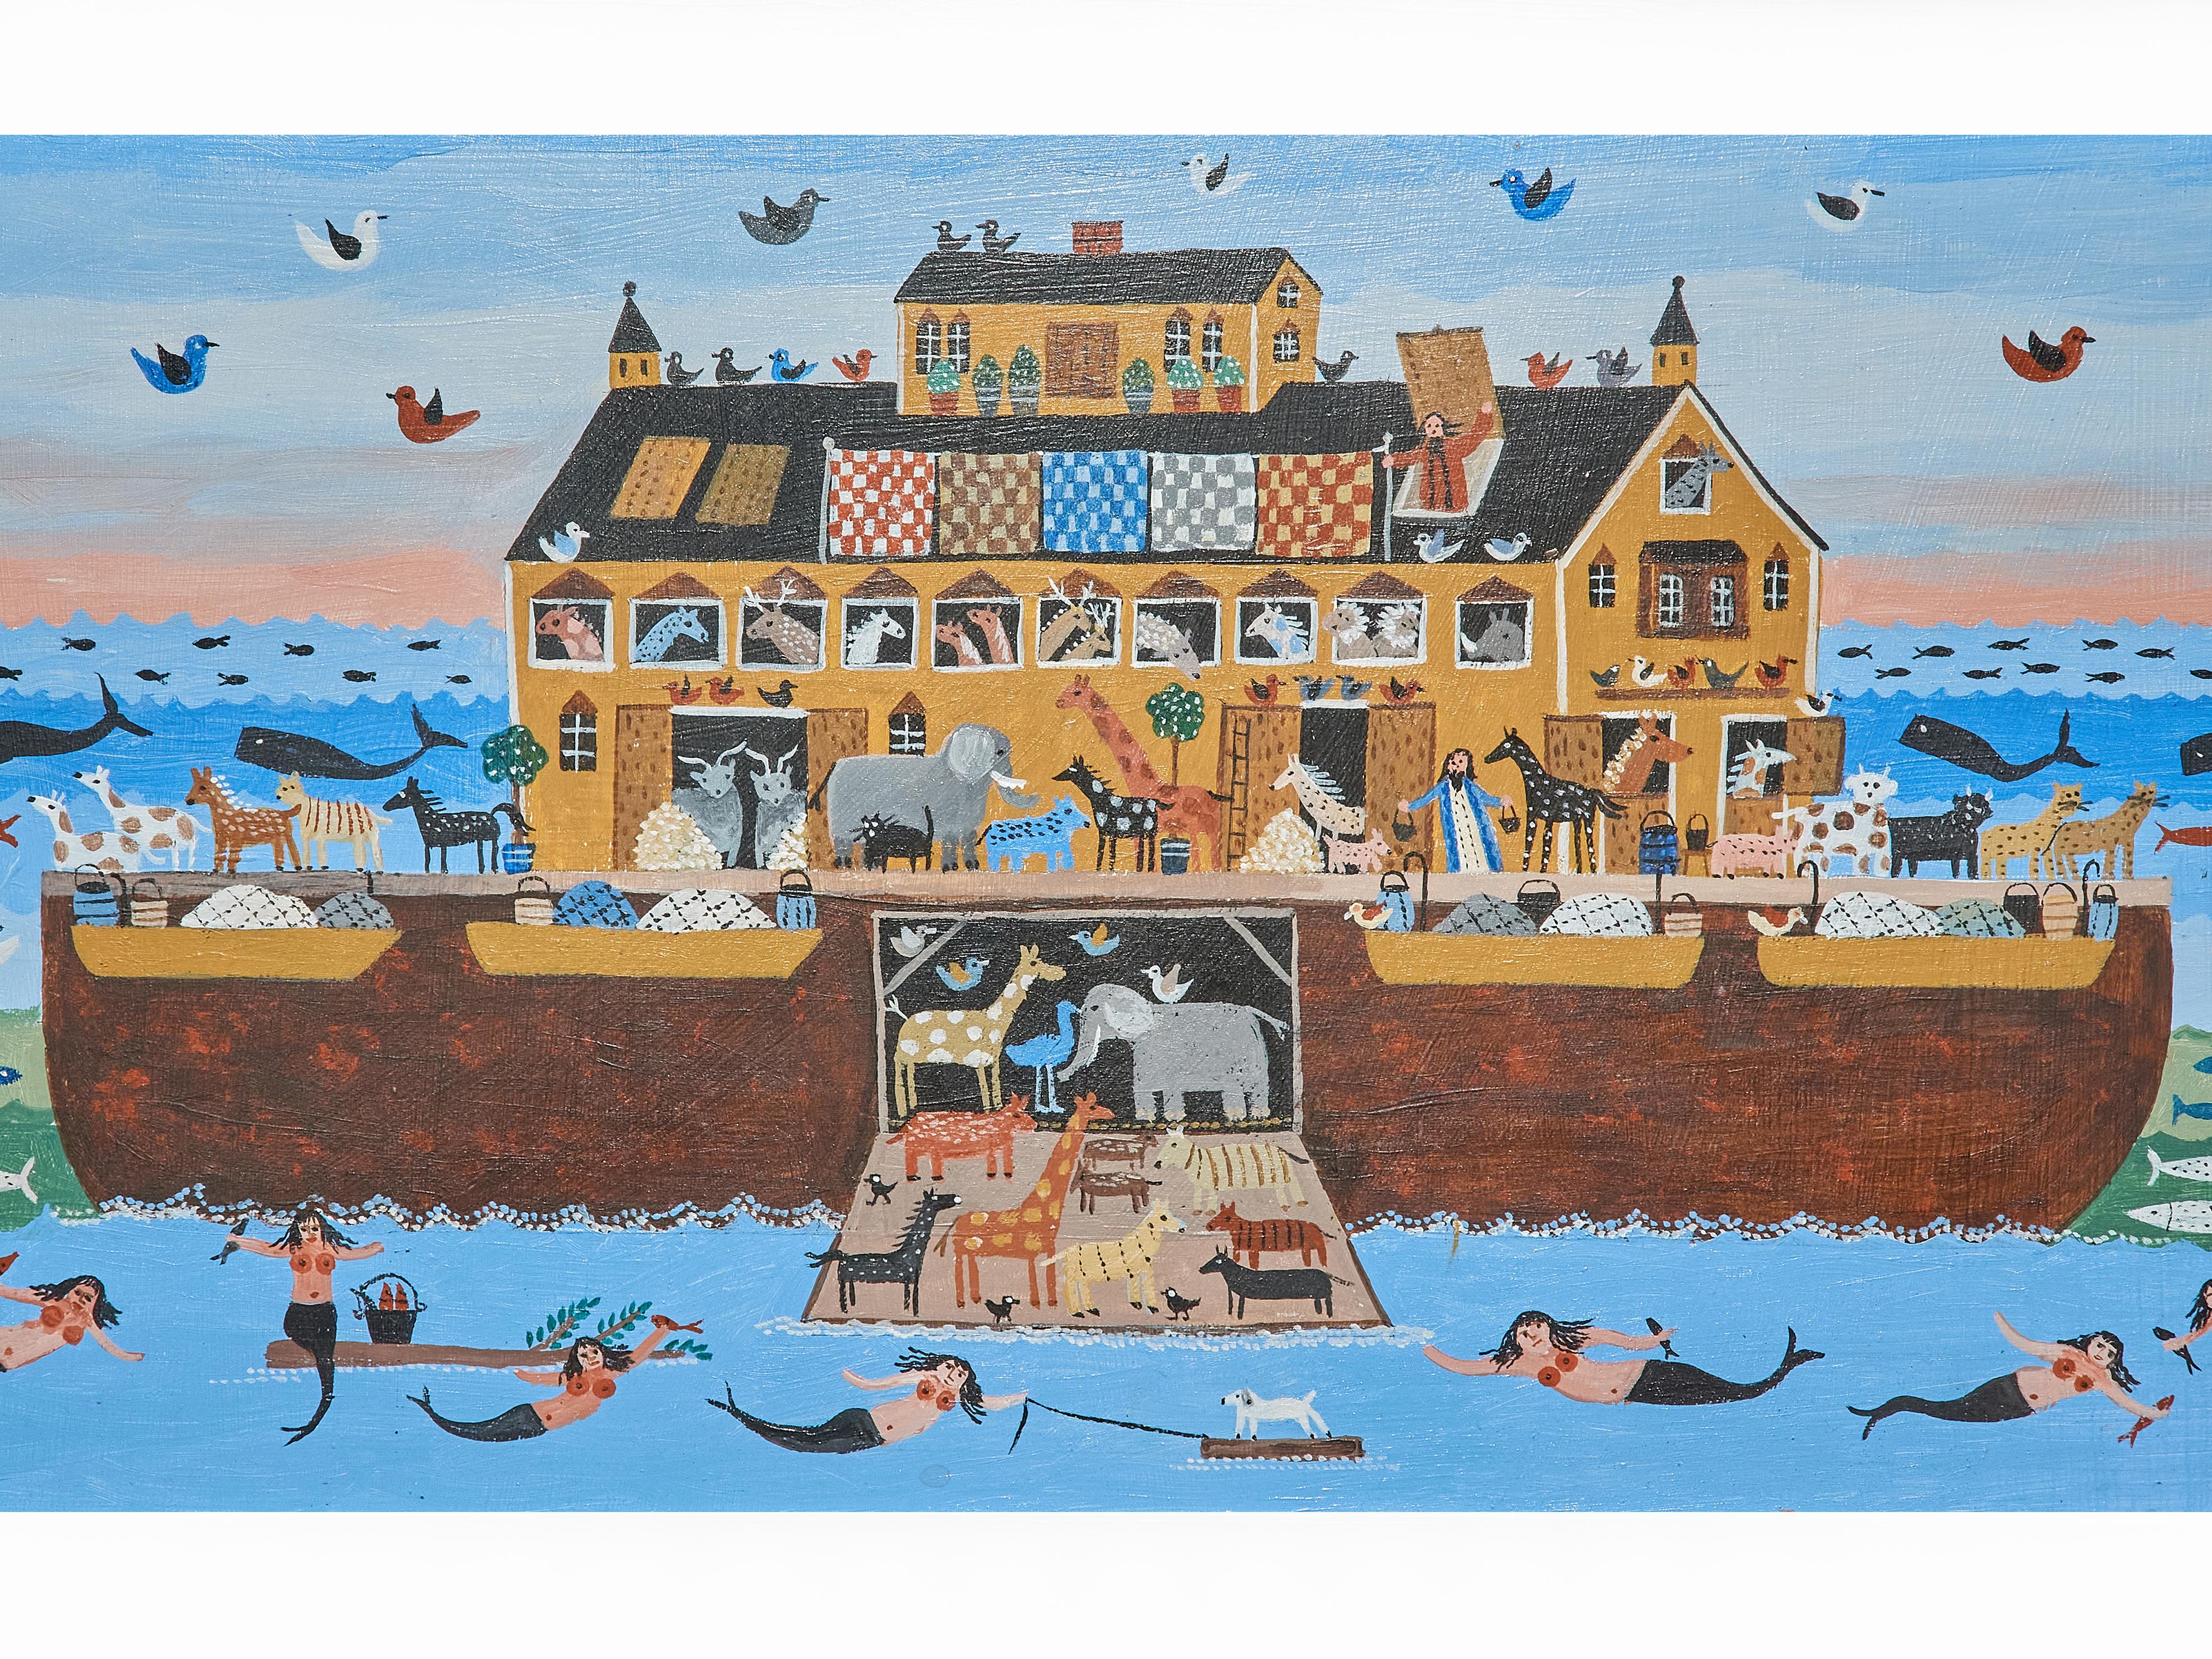 Colorful painting of Noah's Ark and mermaids by listed Massachusetts Nautical folk artist Rosebee (1932-2016).
Beautiful colors in acrylic on panel in excellent condition. She used her paintings to share the history of her family and the